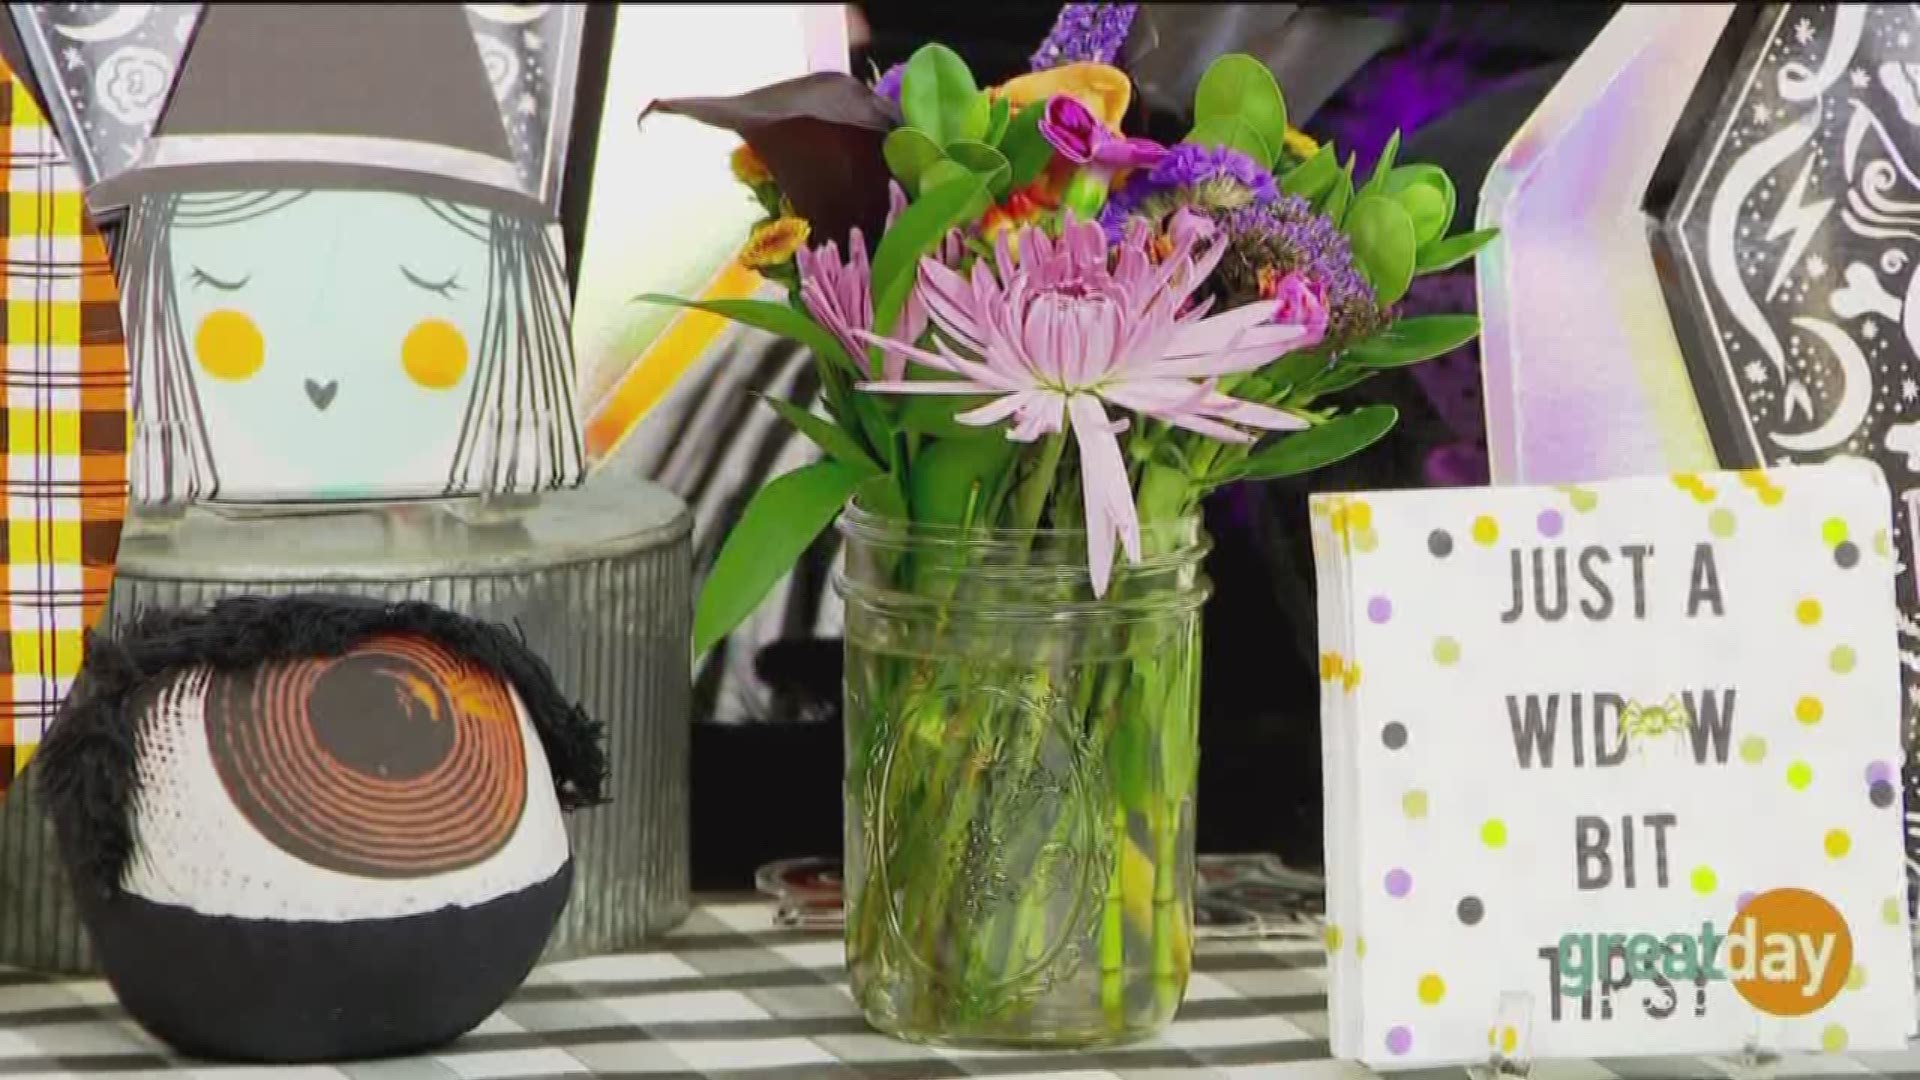 Kim Etheridge from Emerson Sloan showed us some easy ideas to spook up your Halloween party